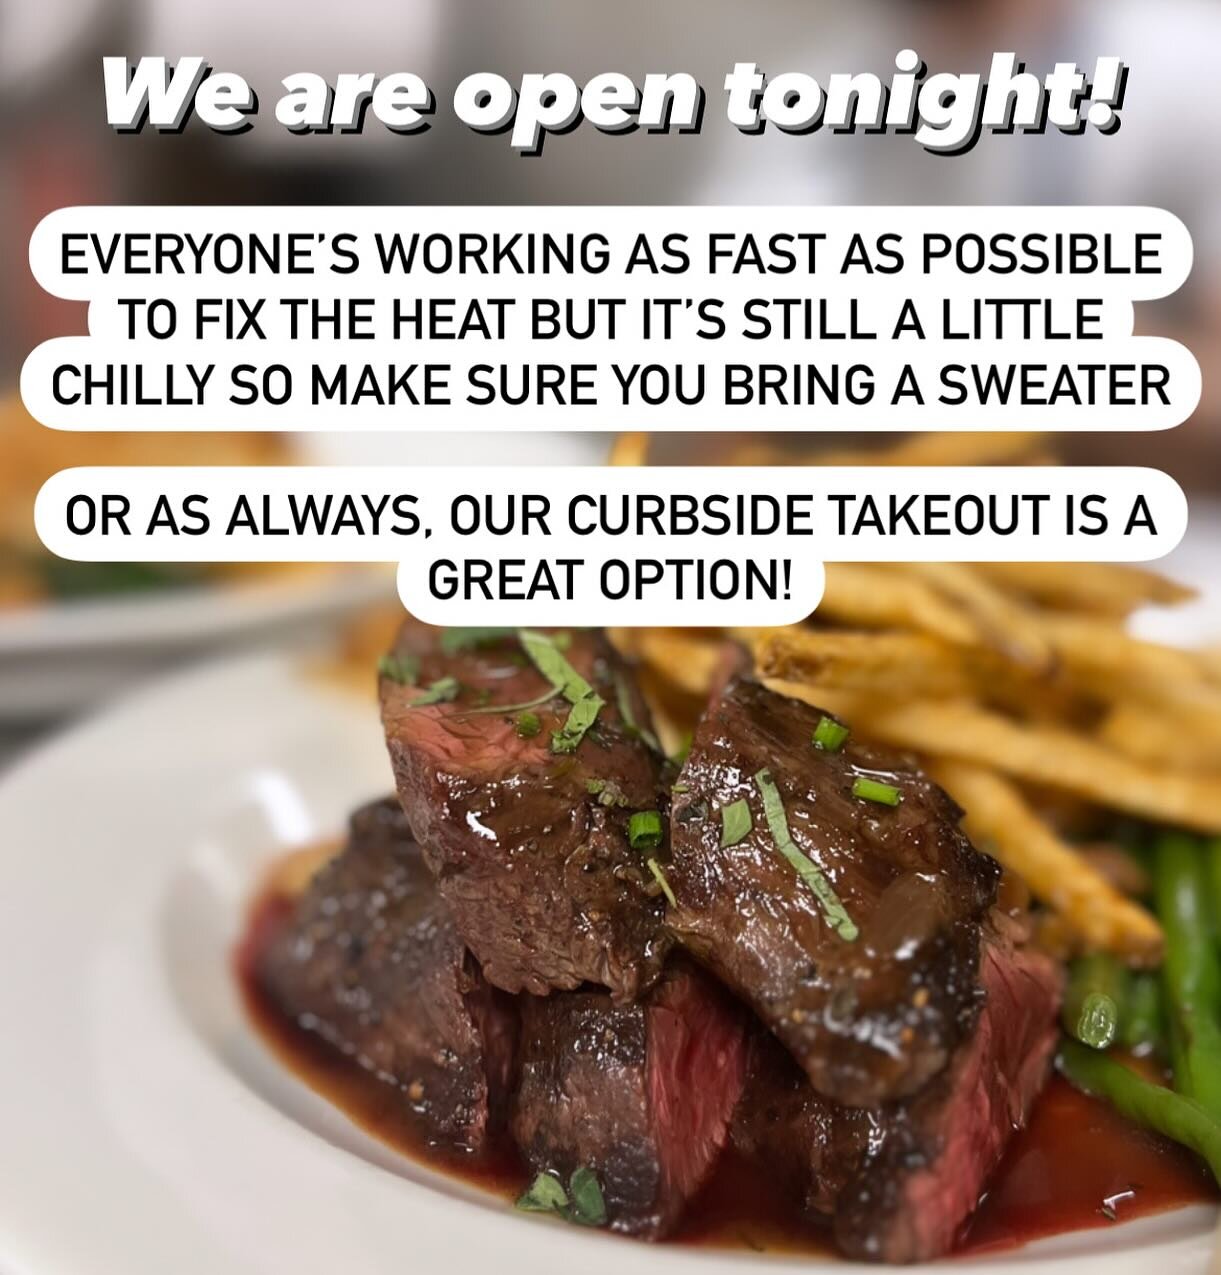 Curbside orders start at 4
Pickups 5:15-9

Reminder: Please have order, payment and vehicle information before calling to keep the takeout moving efficiently!